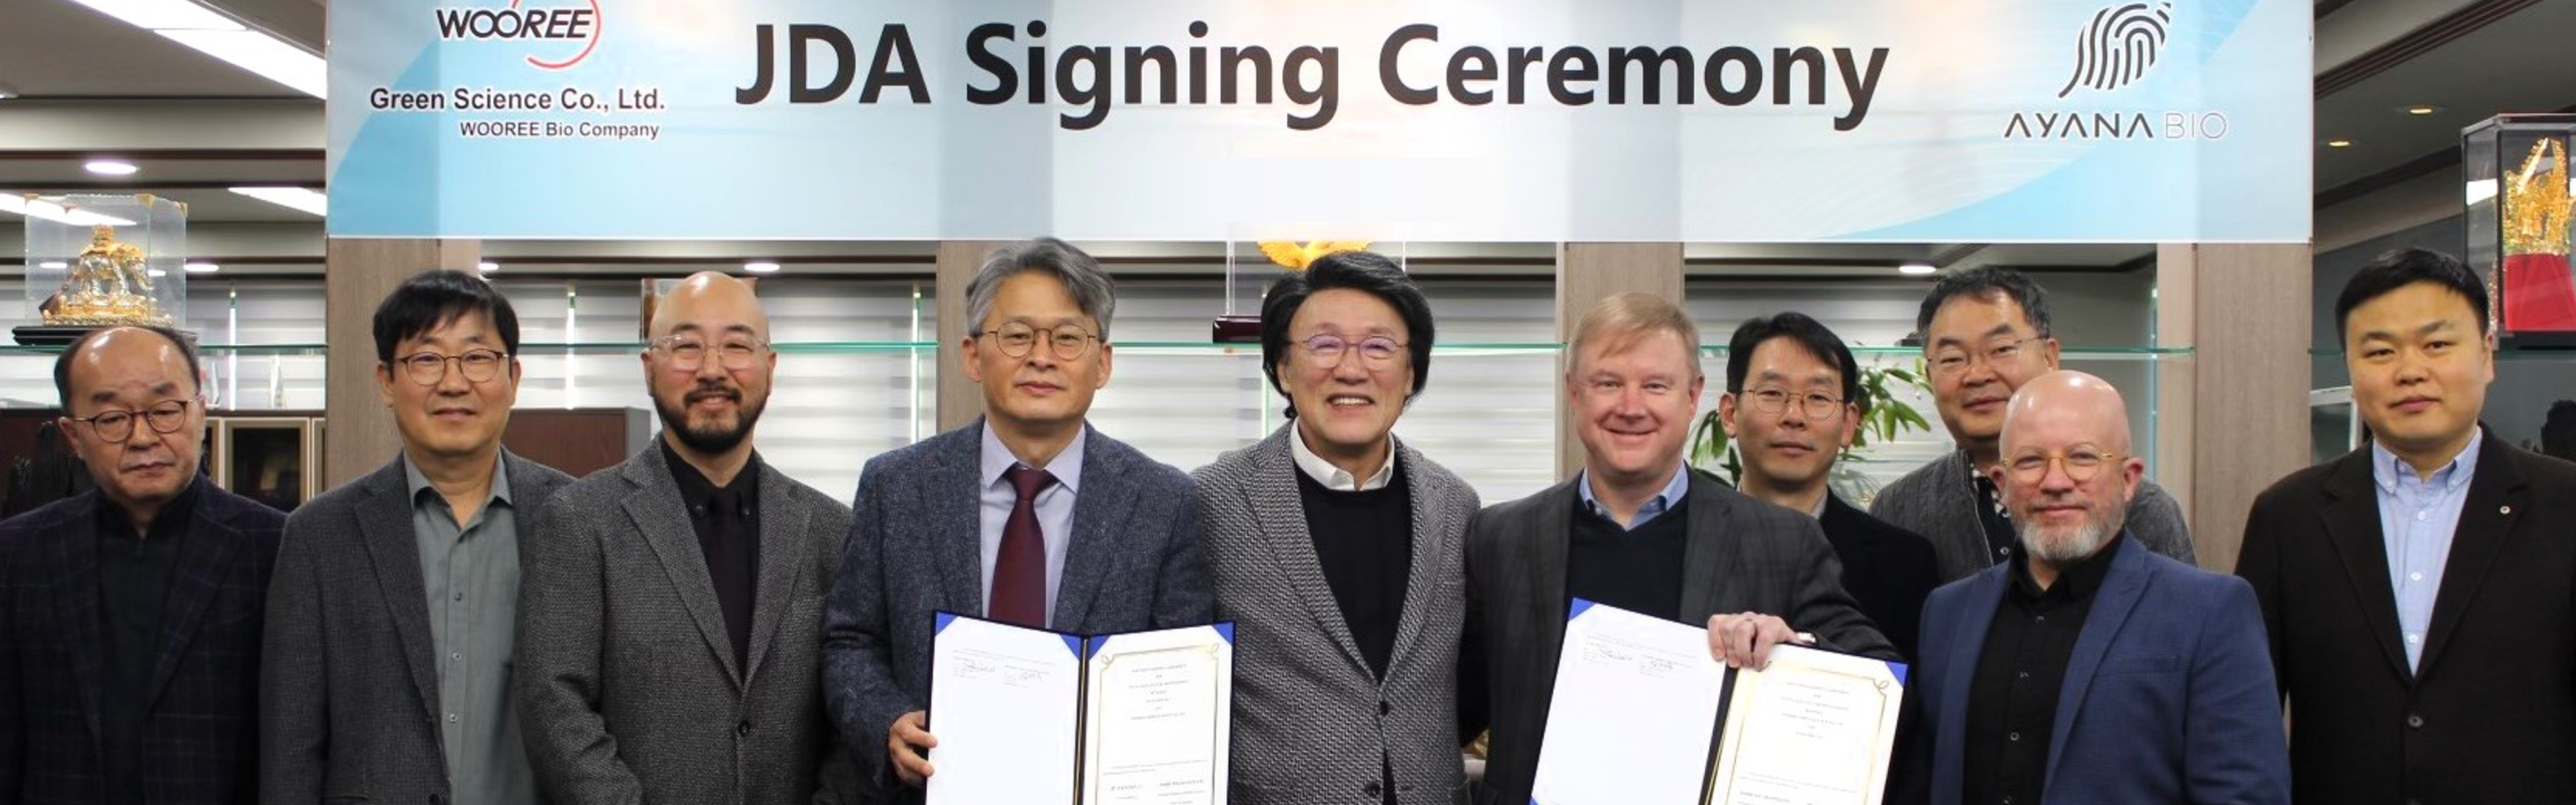 Korea deal for US plant cell pioneer